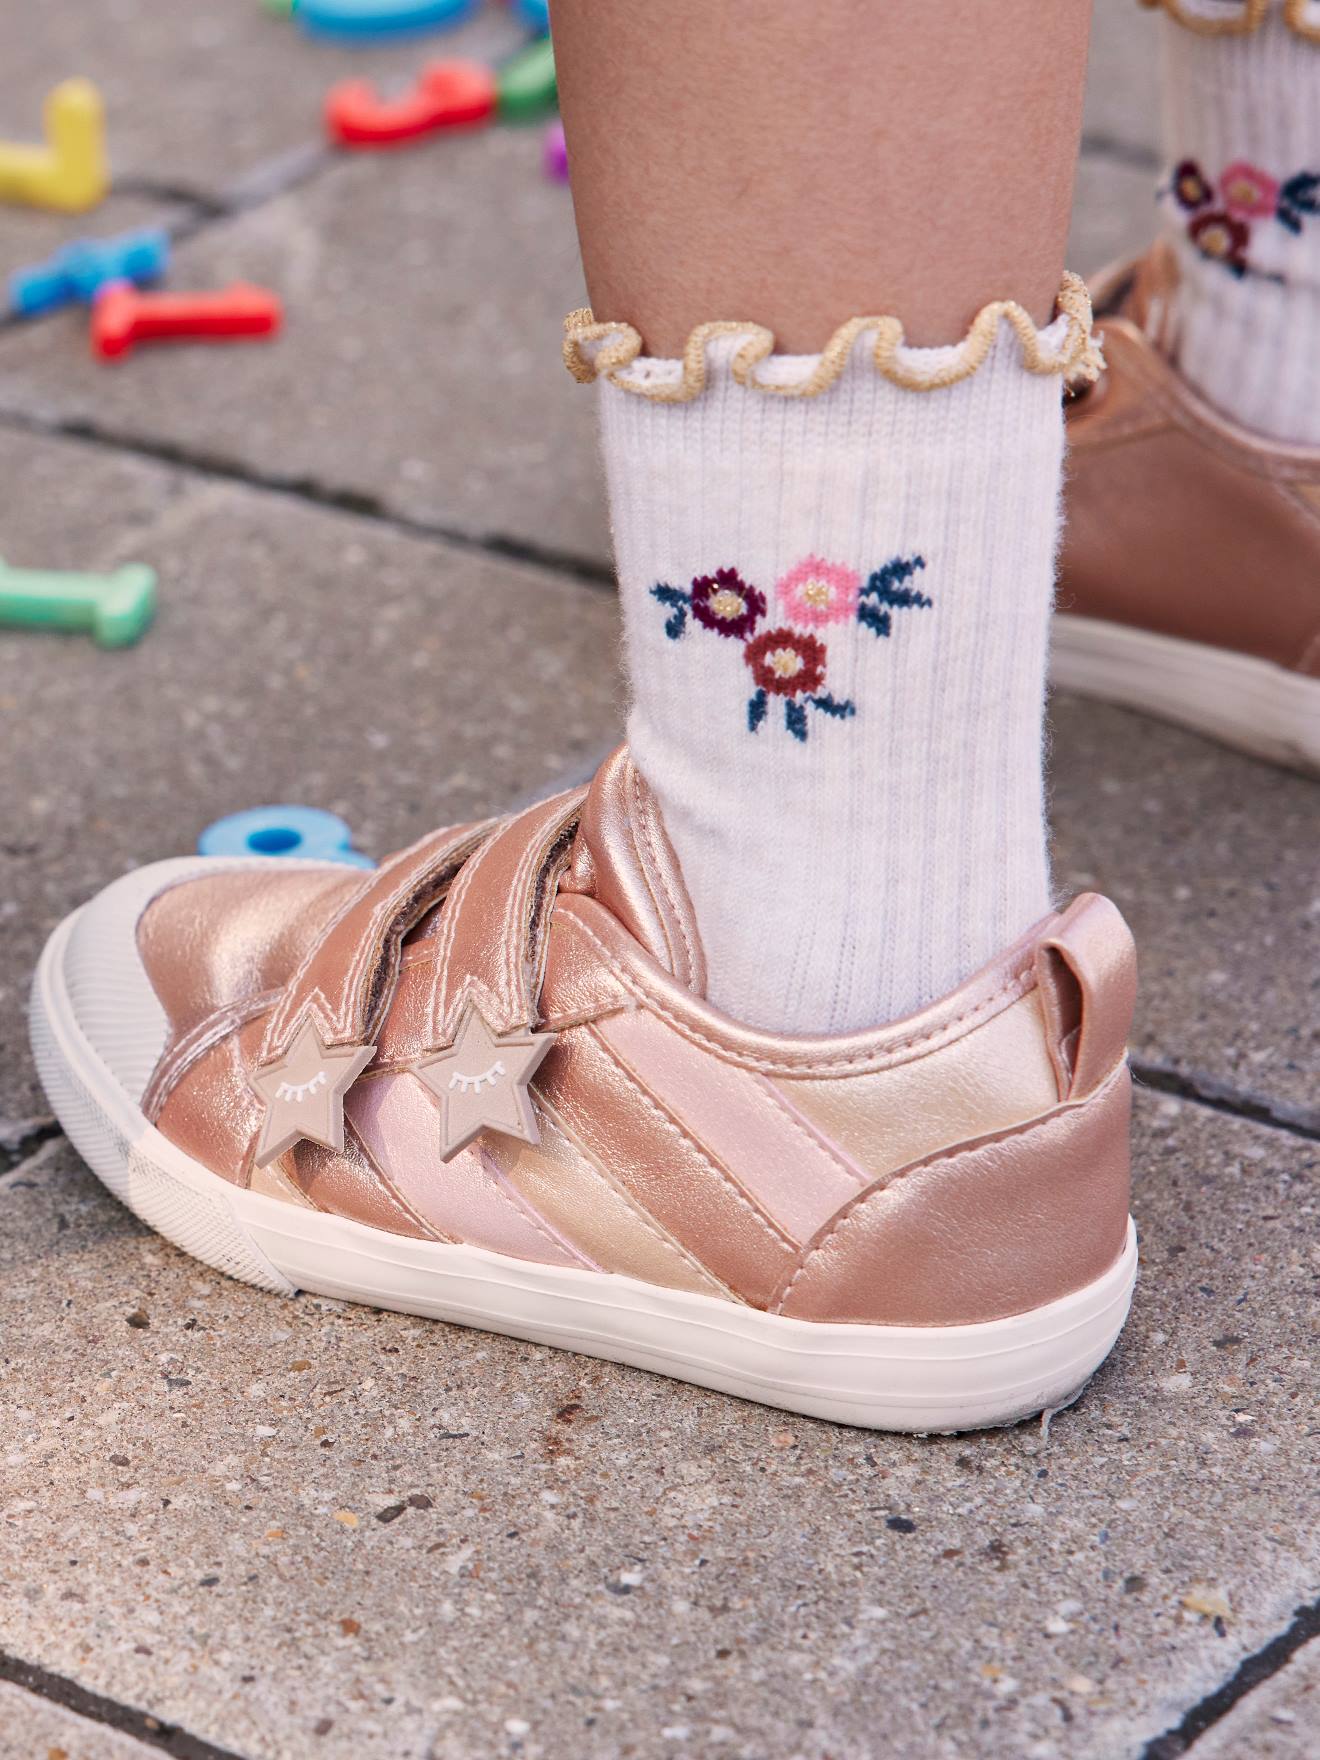 Trainers with Touch Fasteners for Girls, Designed for Autonomy shimmery light pink